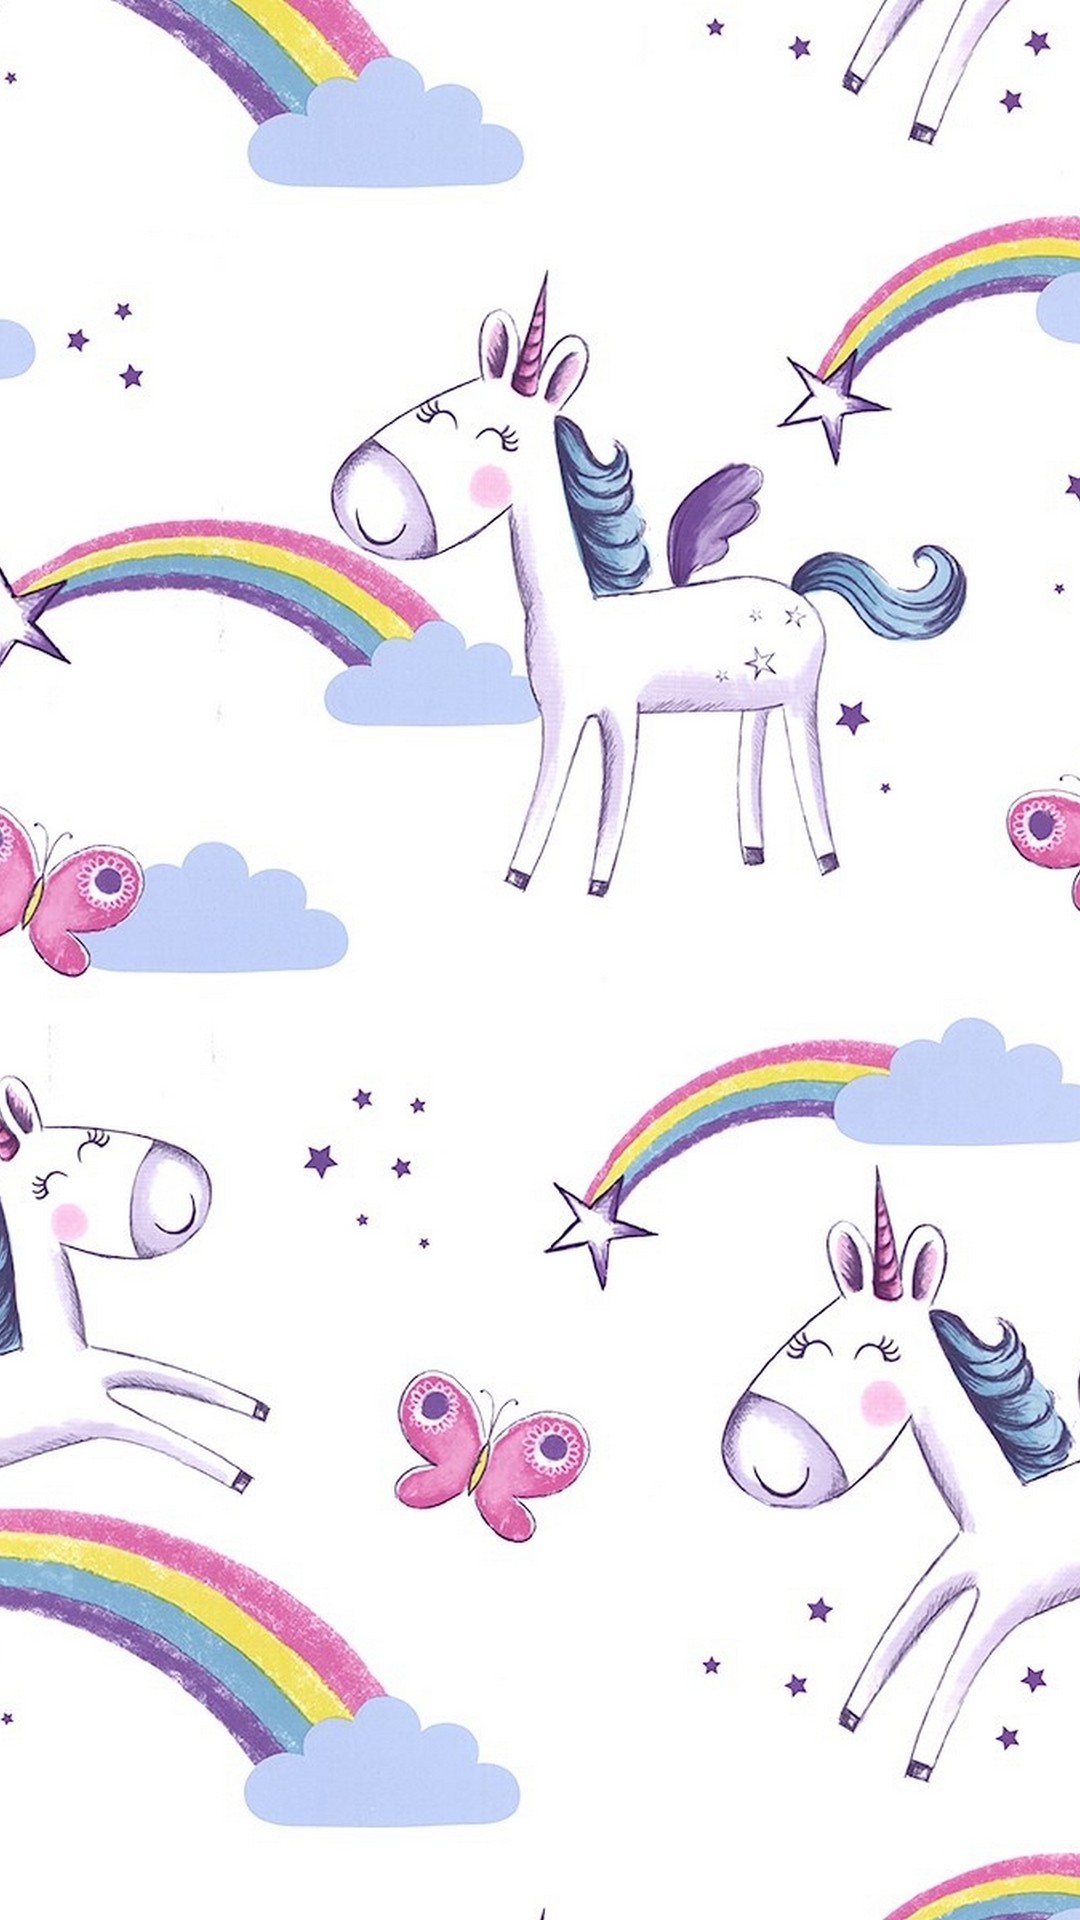 Android Wallpaper Cute Girly Unicorn 2020 Android Wallpapers